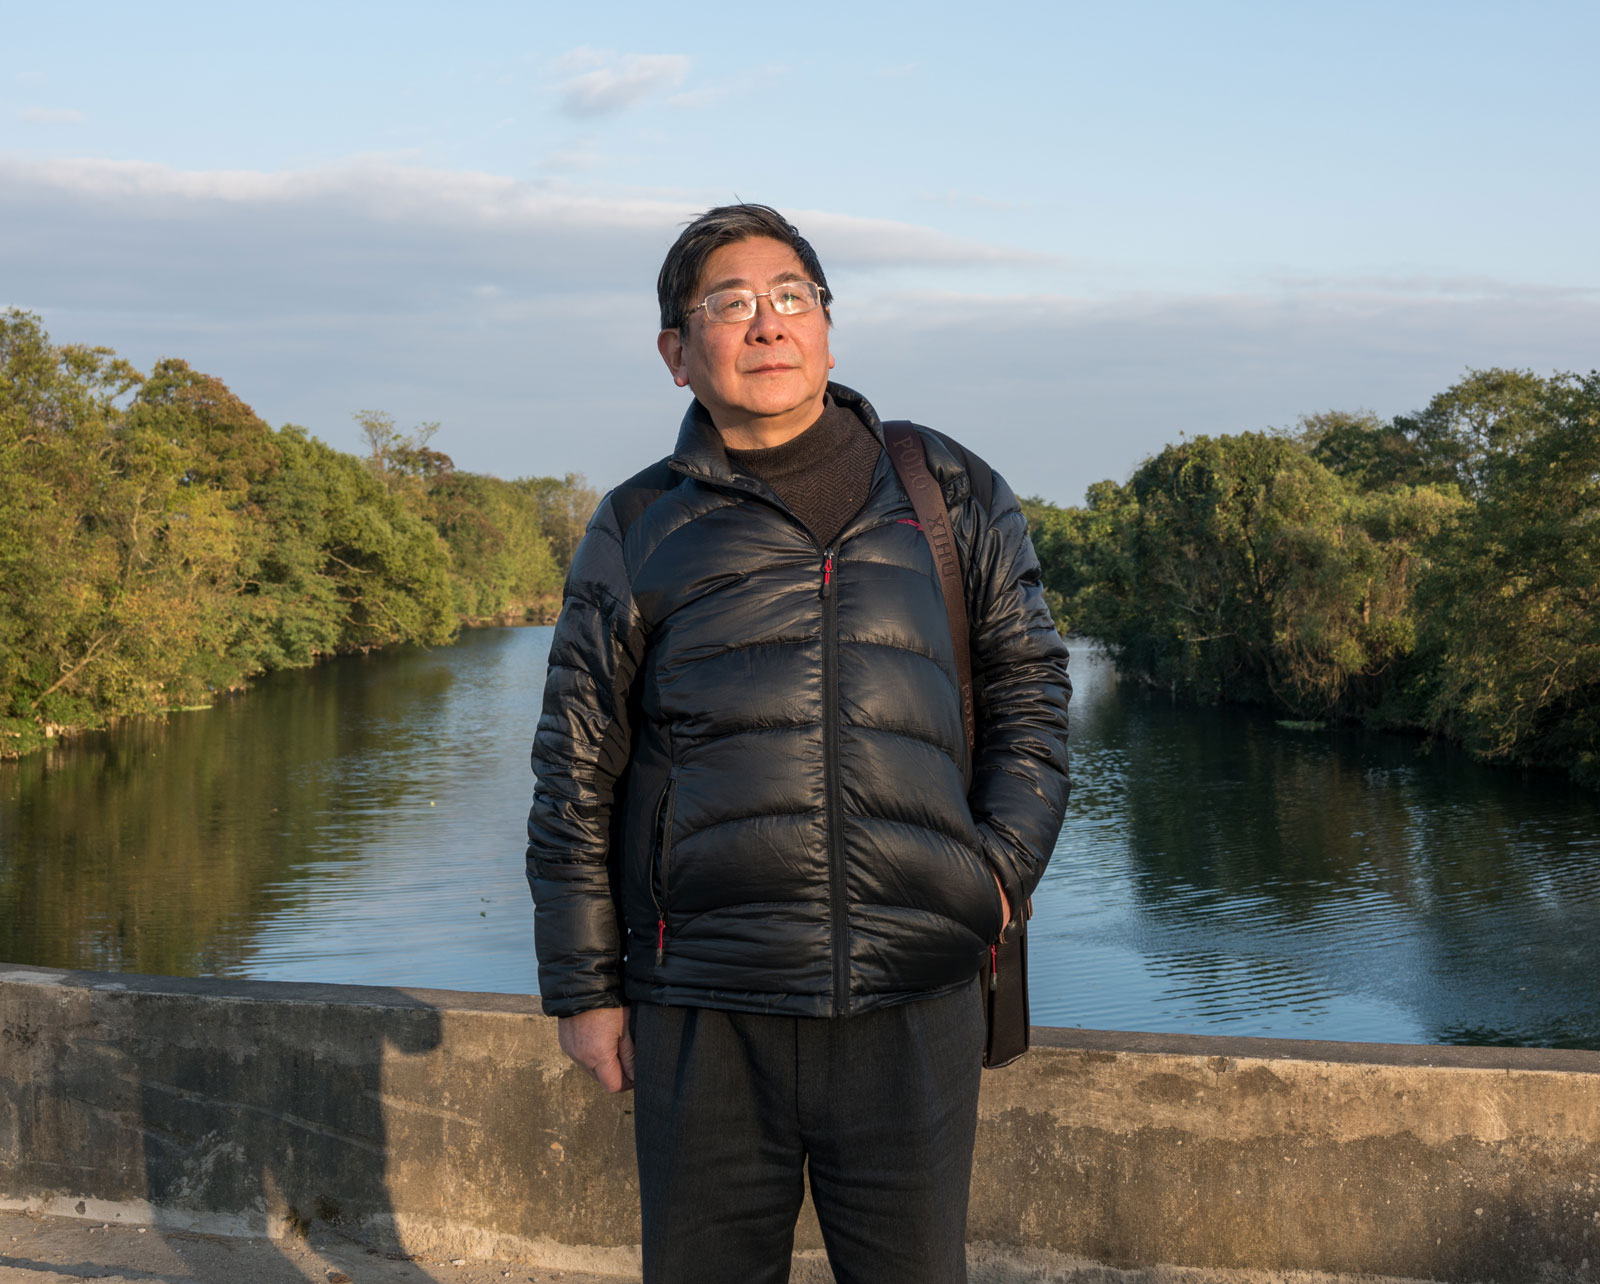 Tan Hecheng, author of The Killing Wind, on China's Cultural Revolution, at Widow's Bridge where many were murdered in the fall of 1967, November 2016